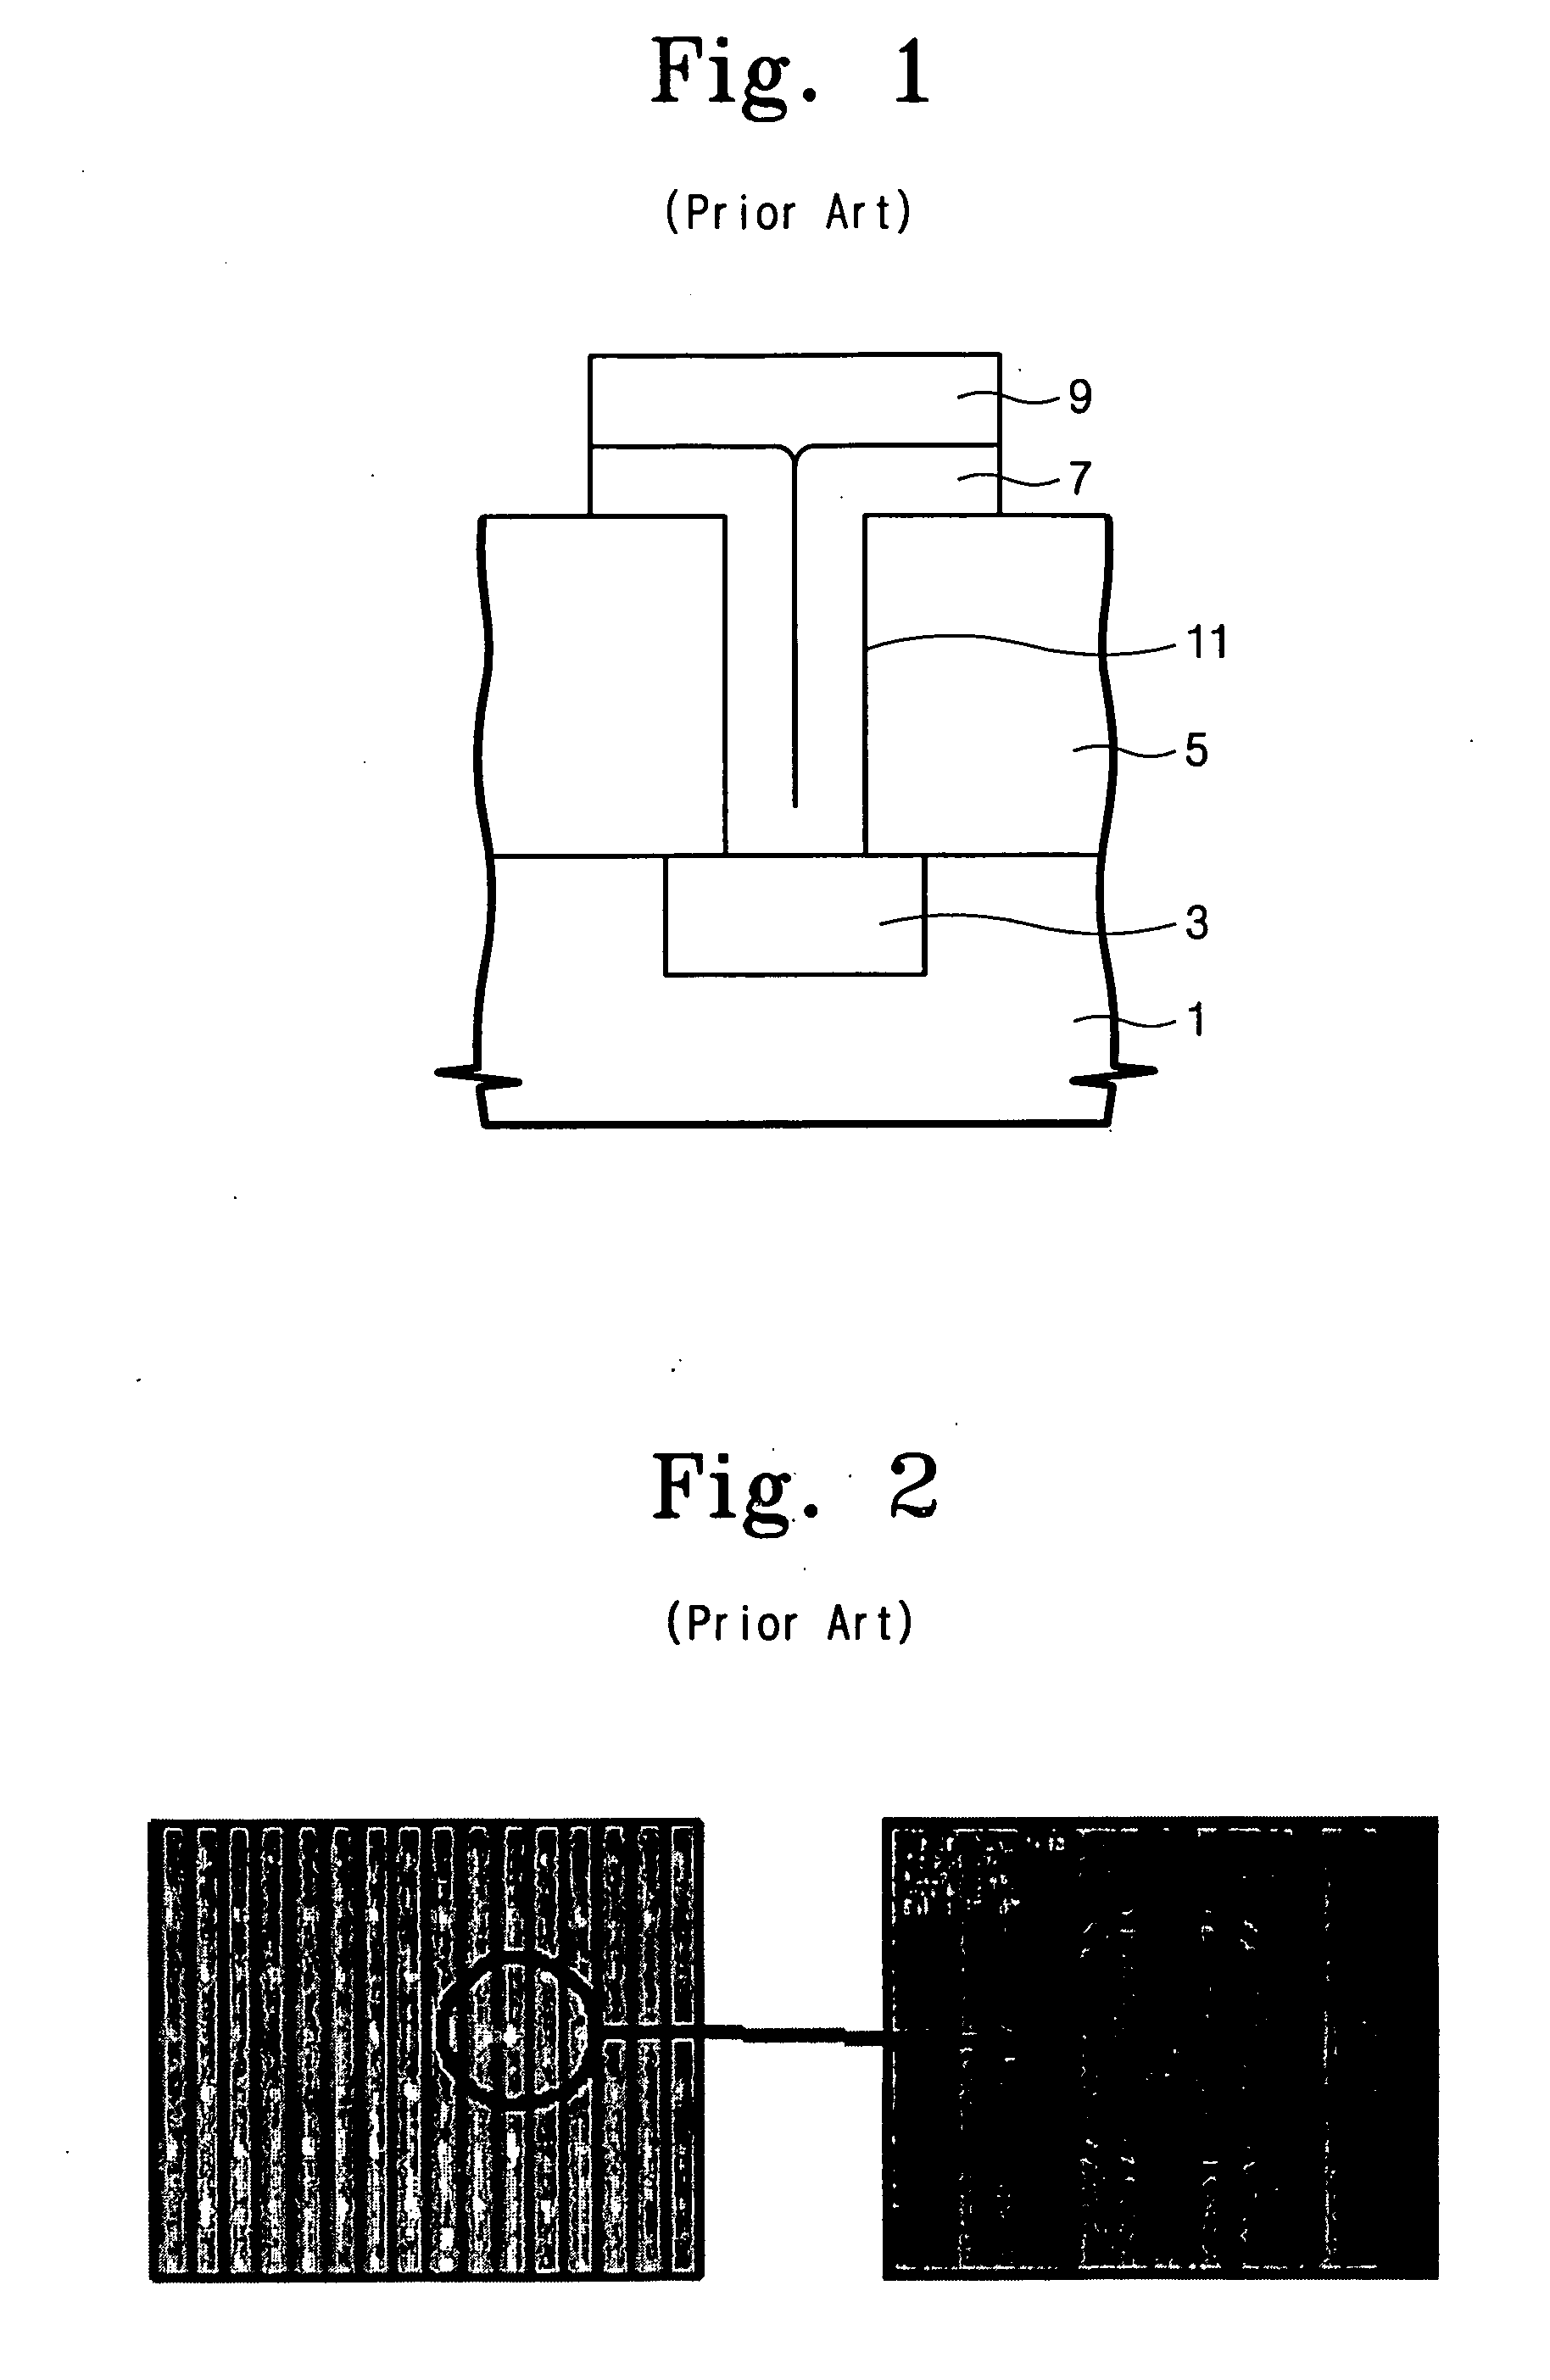 Method for forming an electrical interconnection providing improved surface morphology of tungsten